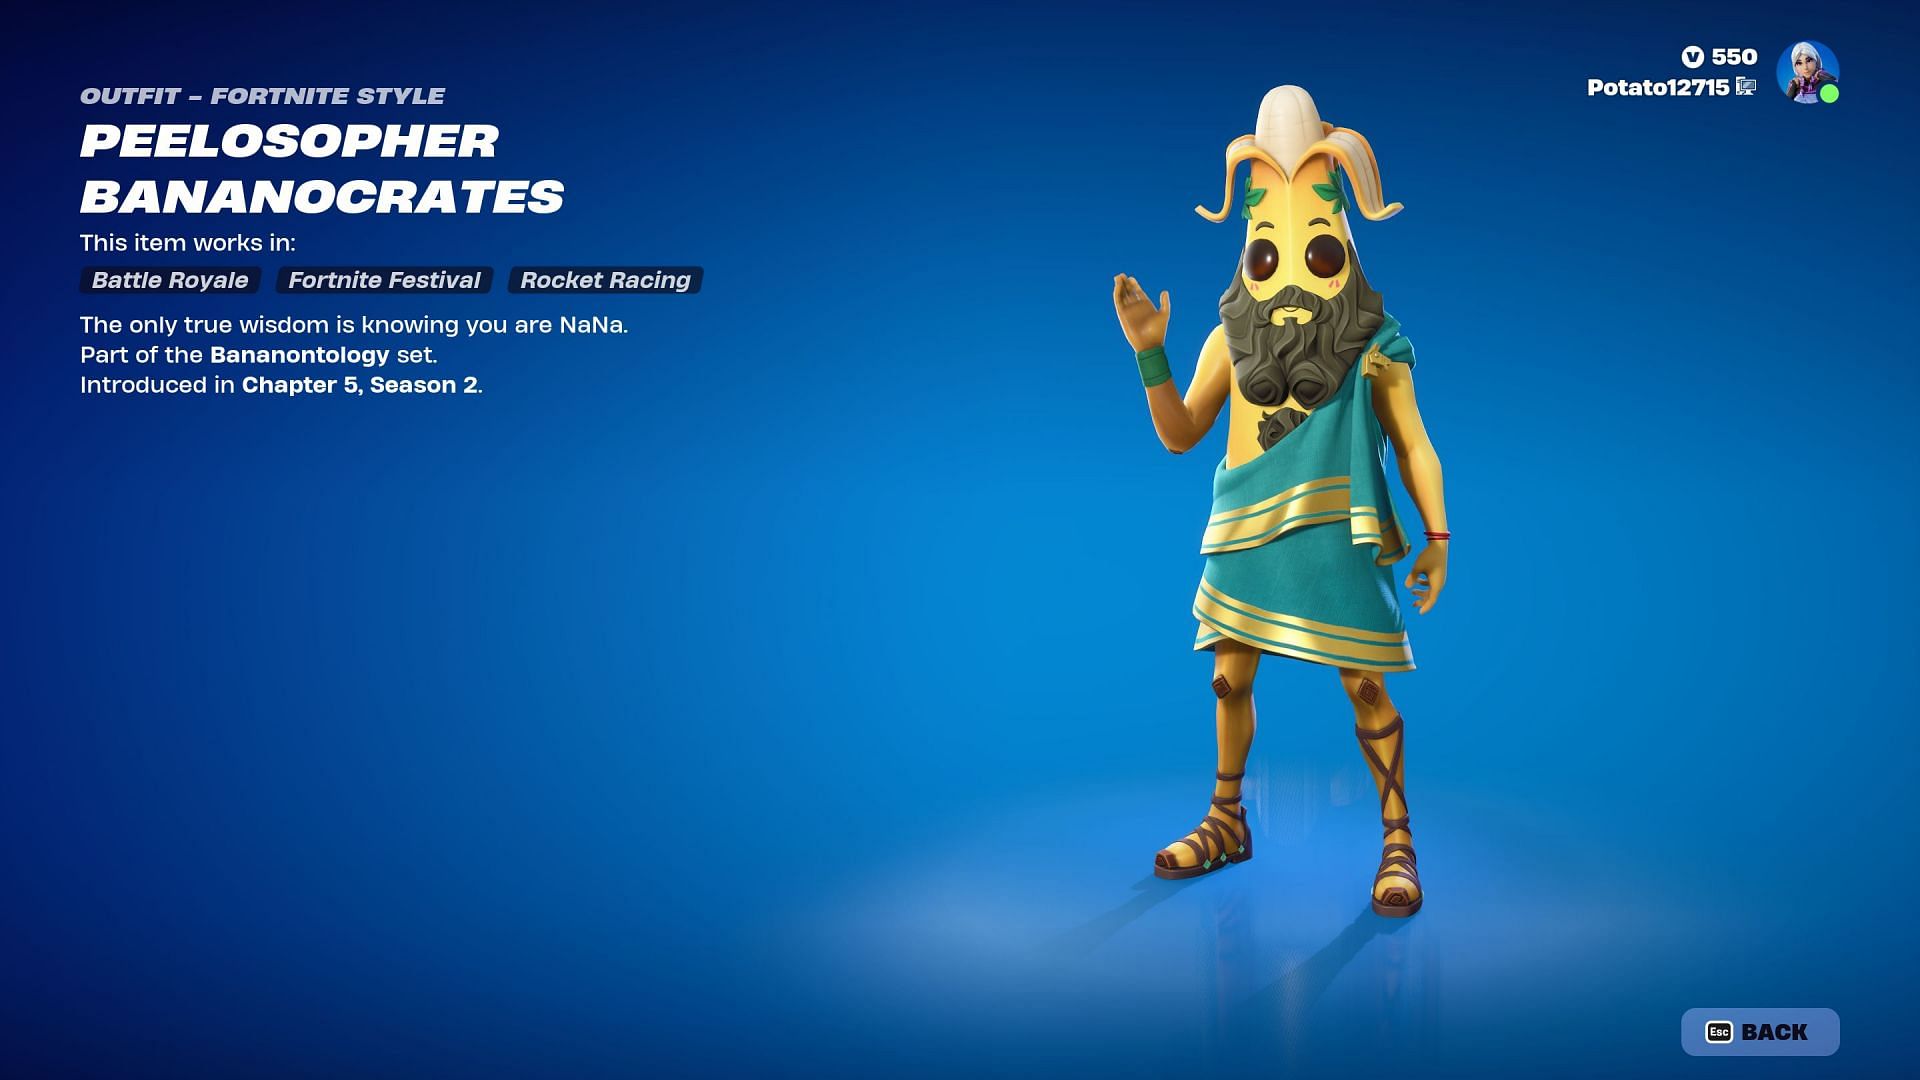 Peelosopher Bananocrates skin is currently listed in the Item Shop (Image via Epic Games/Fortnite)